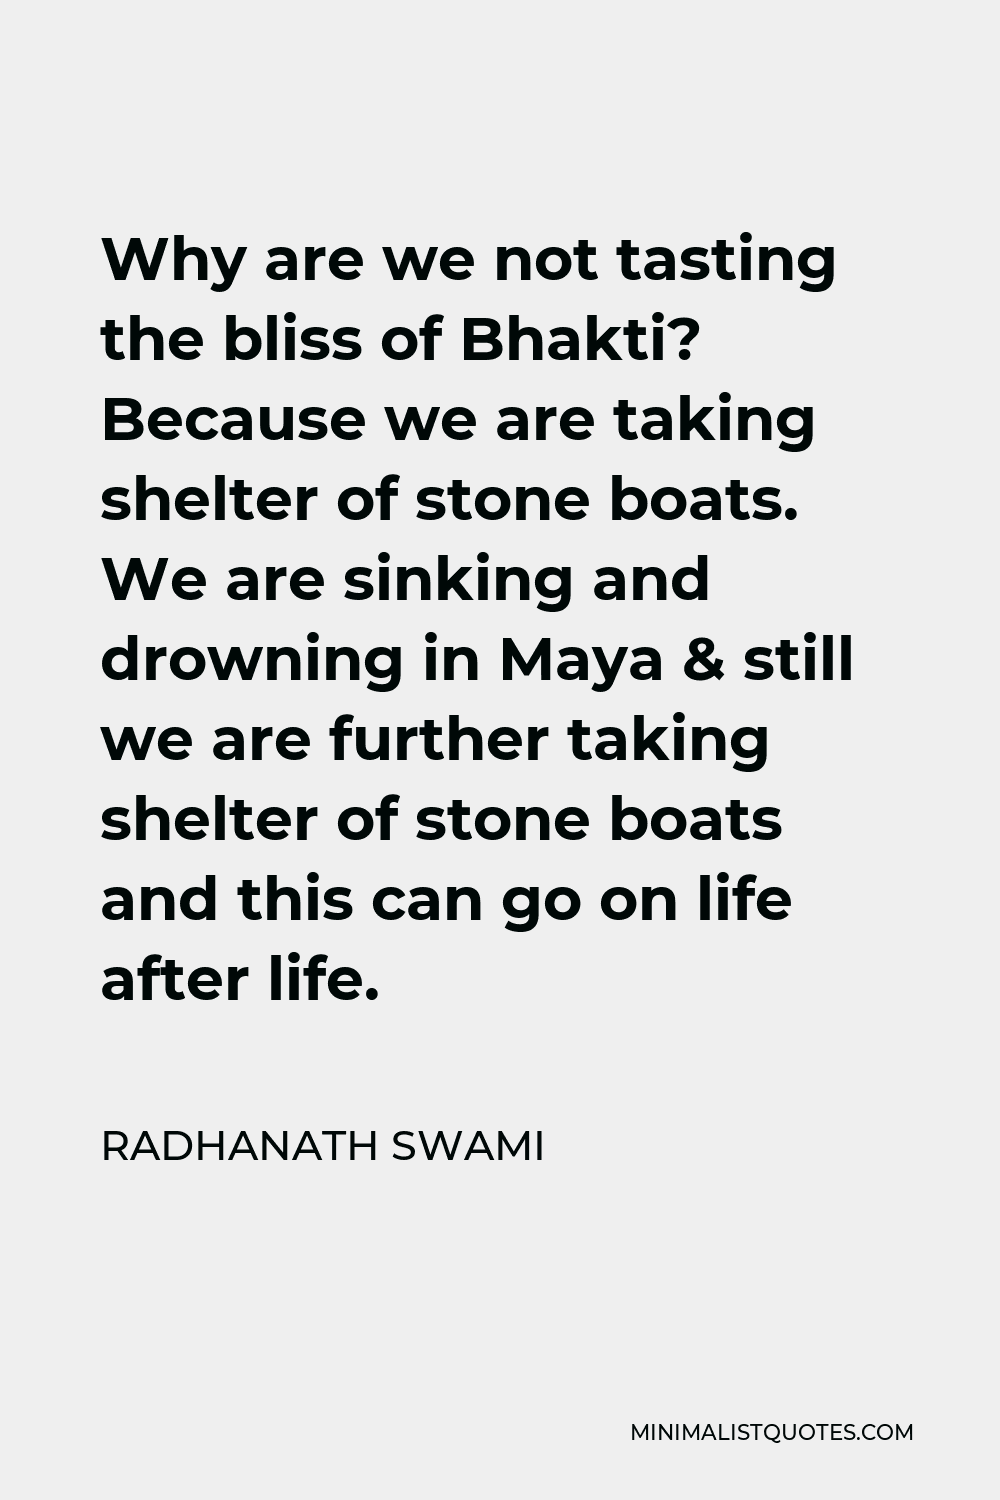 Radhanath Swami Quote - Why are we not tasting the bliss of Bhakti? Because we are taking shelter of stone boats. We are sinking and drowning in Maya & still we are further taking shelter of stone boats and this can go on life after life.